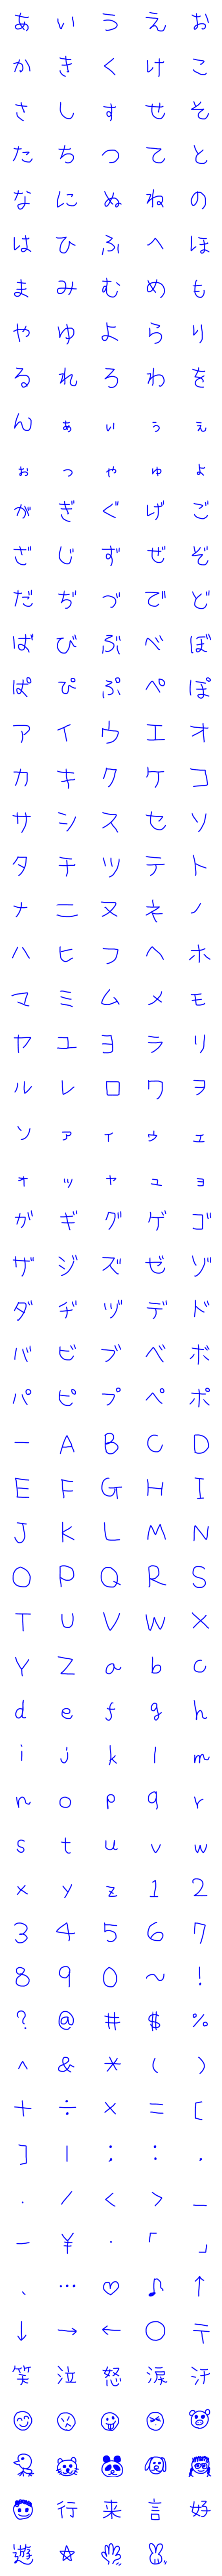 [LINE絵文字]ひらがな絵文字2の画像一覧